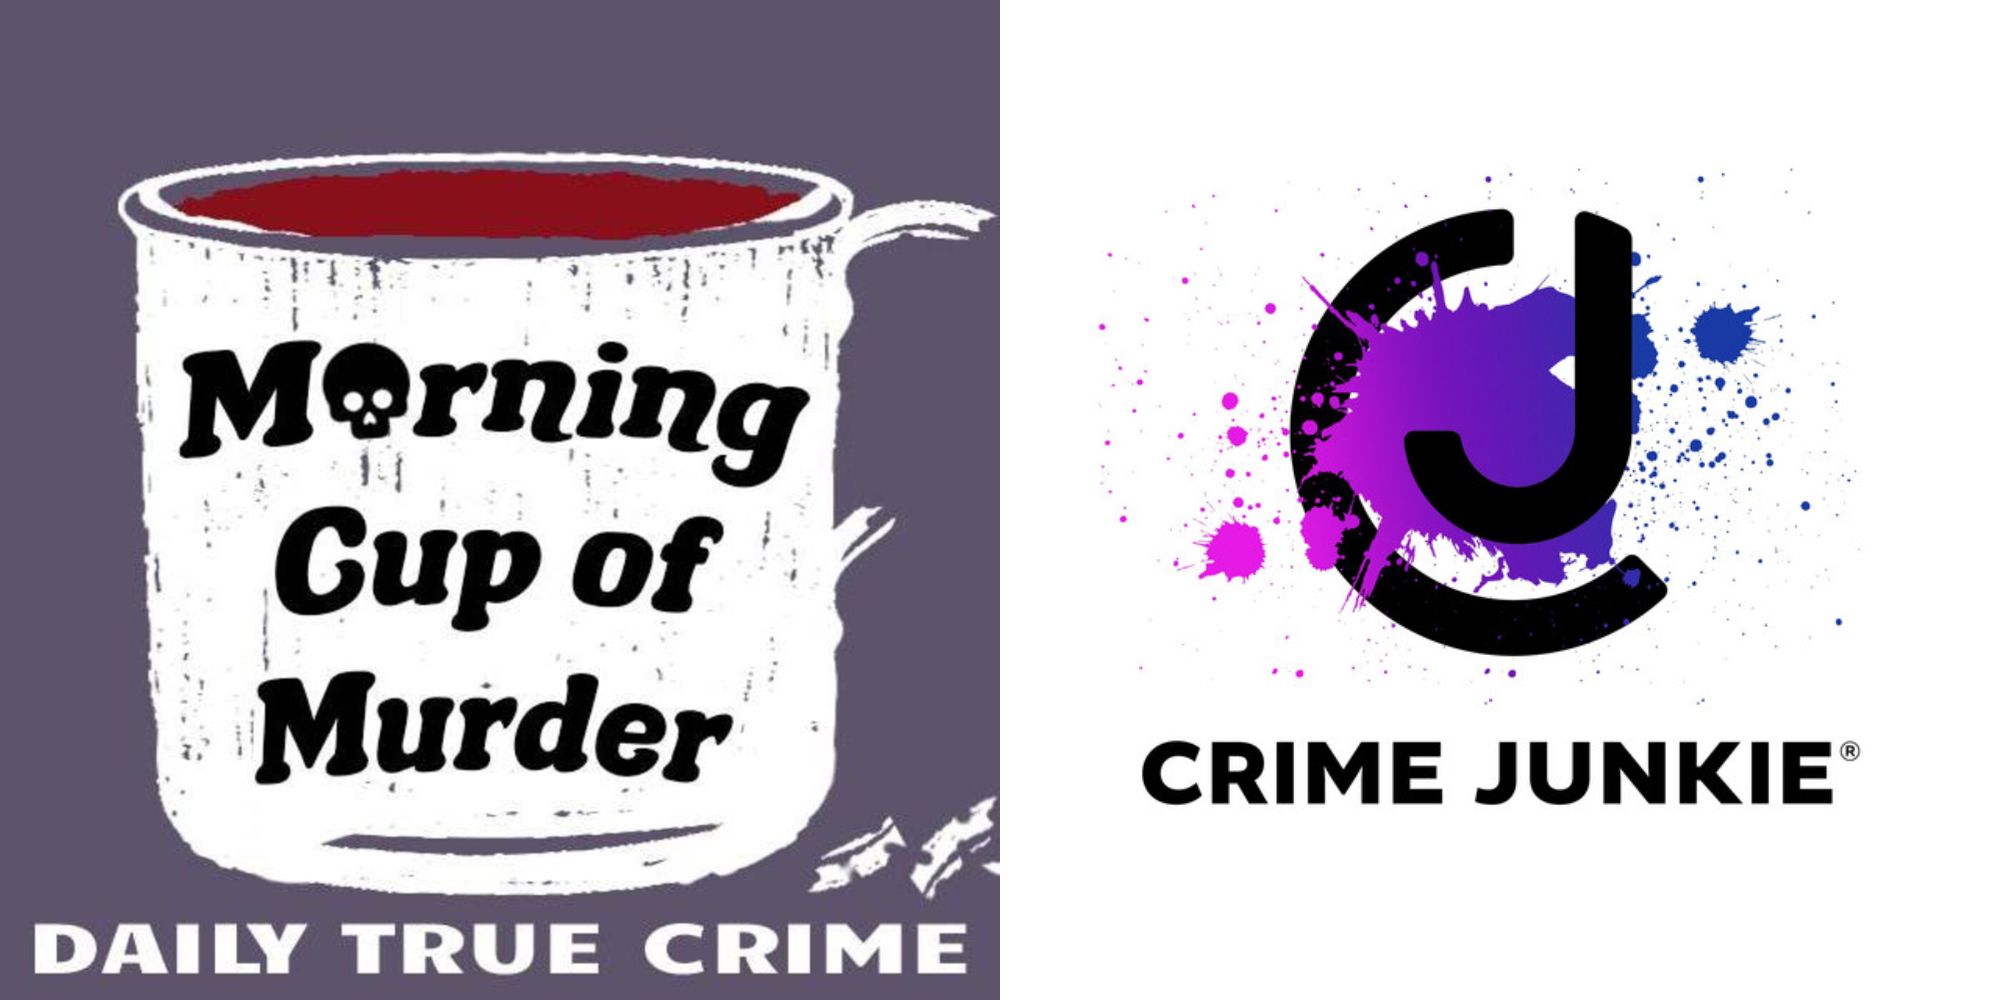 Split image showing logos for the Morning Cup of Murder and Crime Junkie podcasts